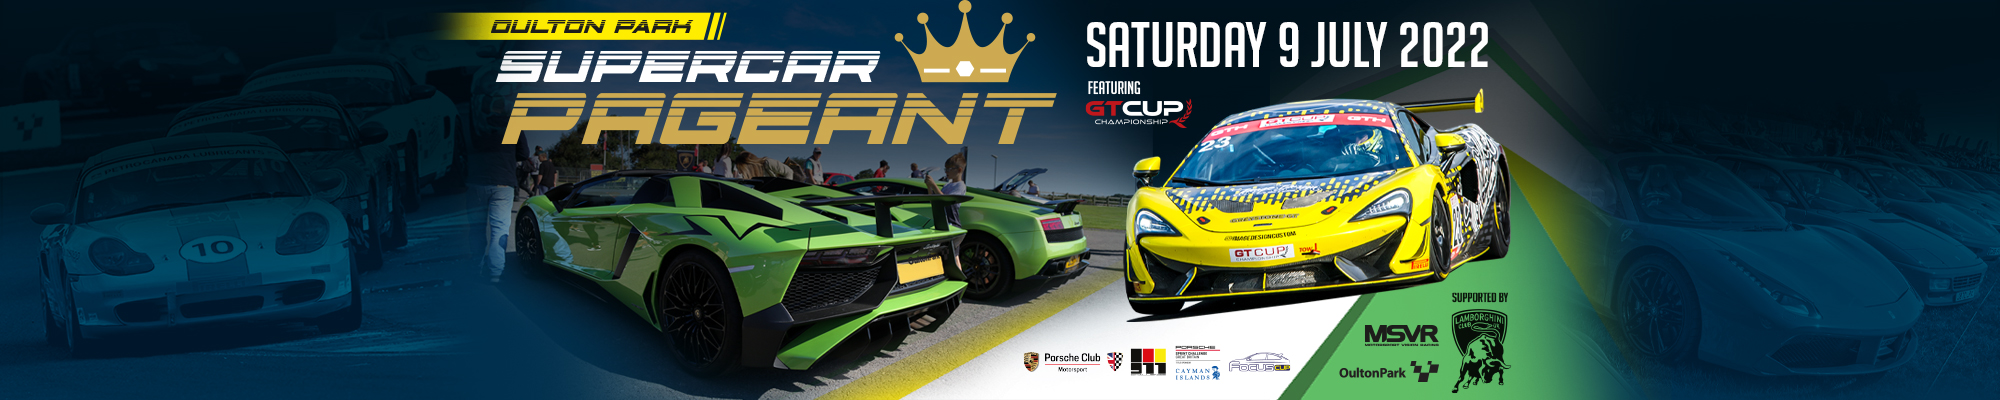 Supercar Pageant - featuring GT Cup Championship